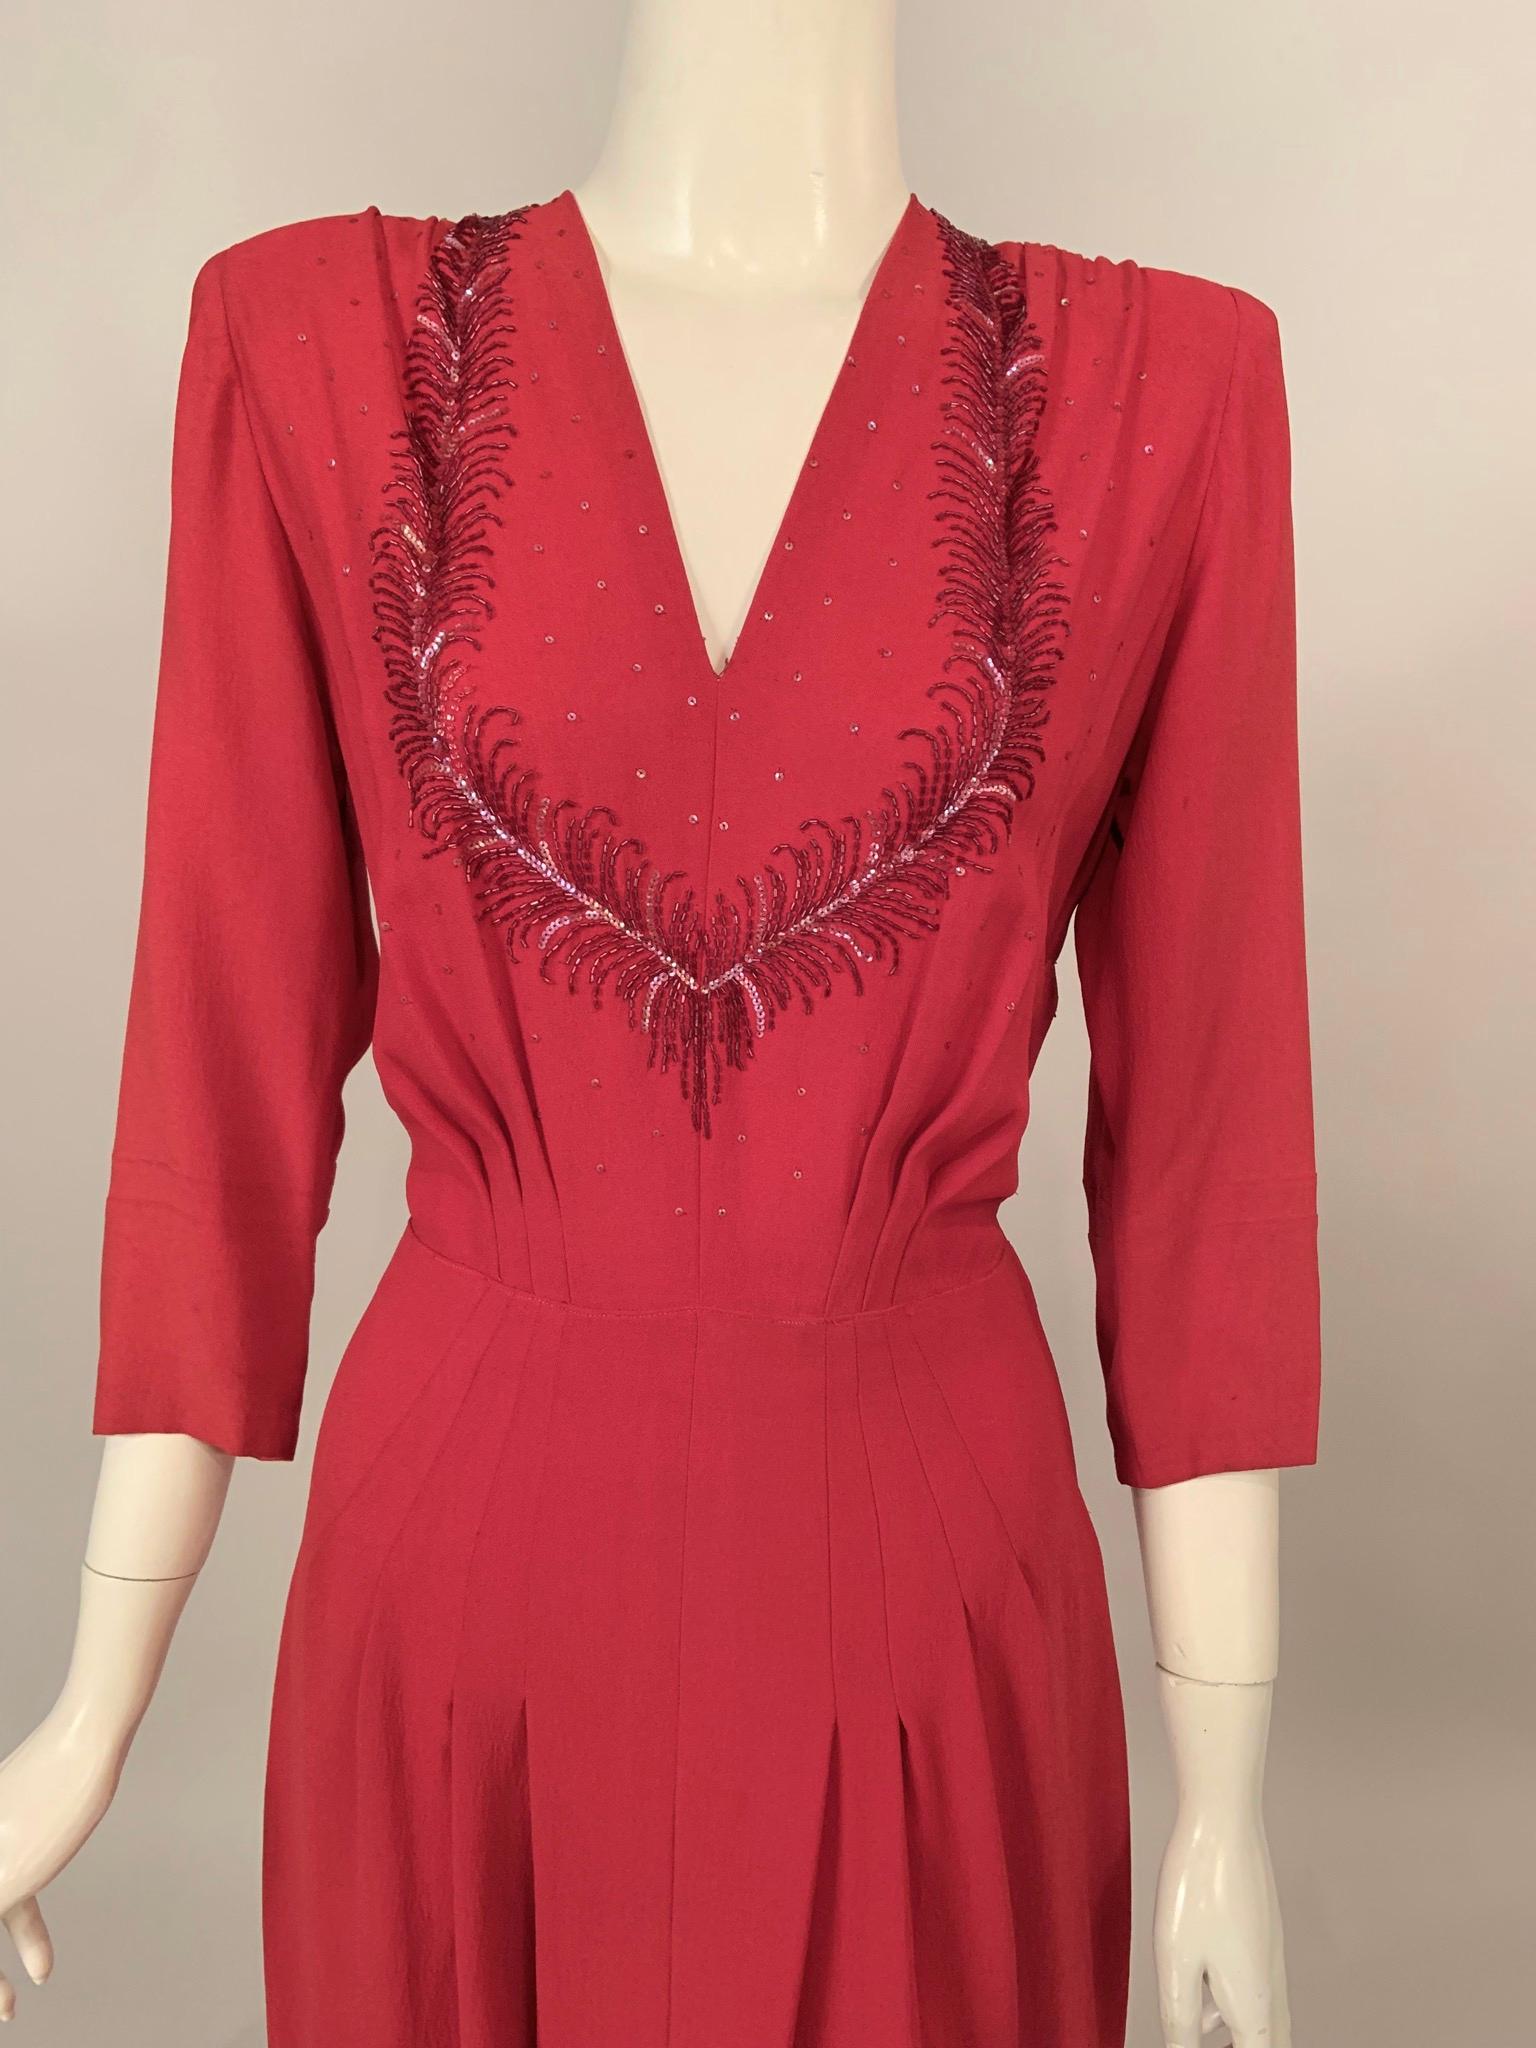 This 1940's dress is a beautiful shade of red embellished with darker red bugle beads and miniature opalescent sequins surrounding the low neckline. The dress has loose pleats on the bodice above stitched down pleats over the hips adding a sleek